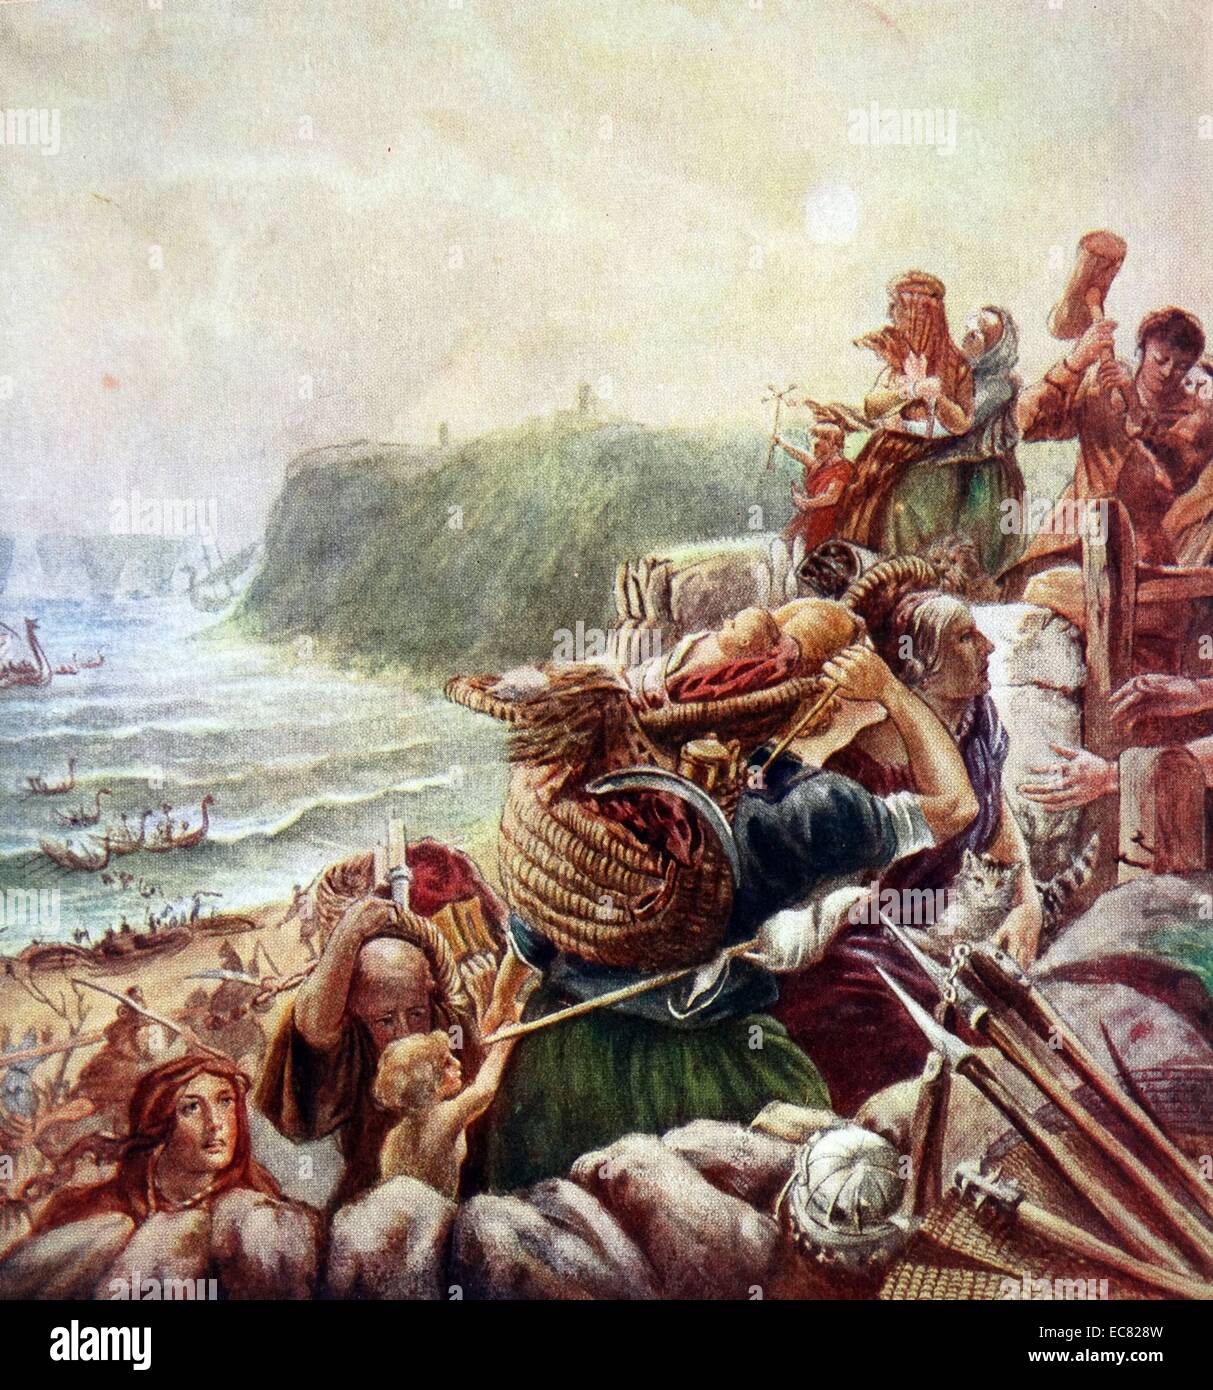 The Danes land at Tynemouth in England. English refugees flee to the safety of a hastily built hill fort. 10th century AD Stock Photo